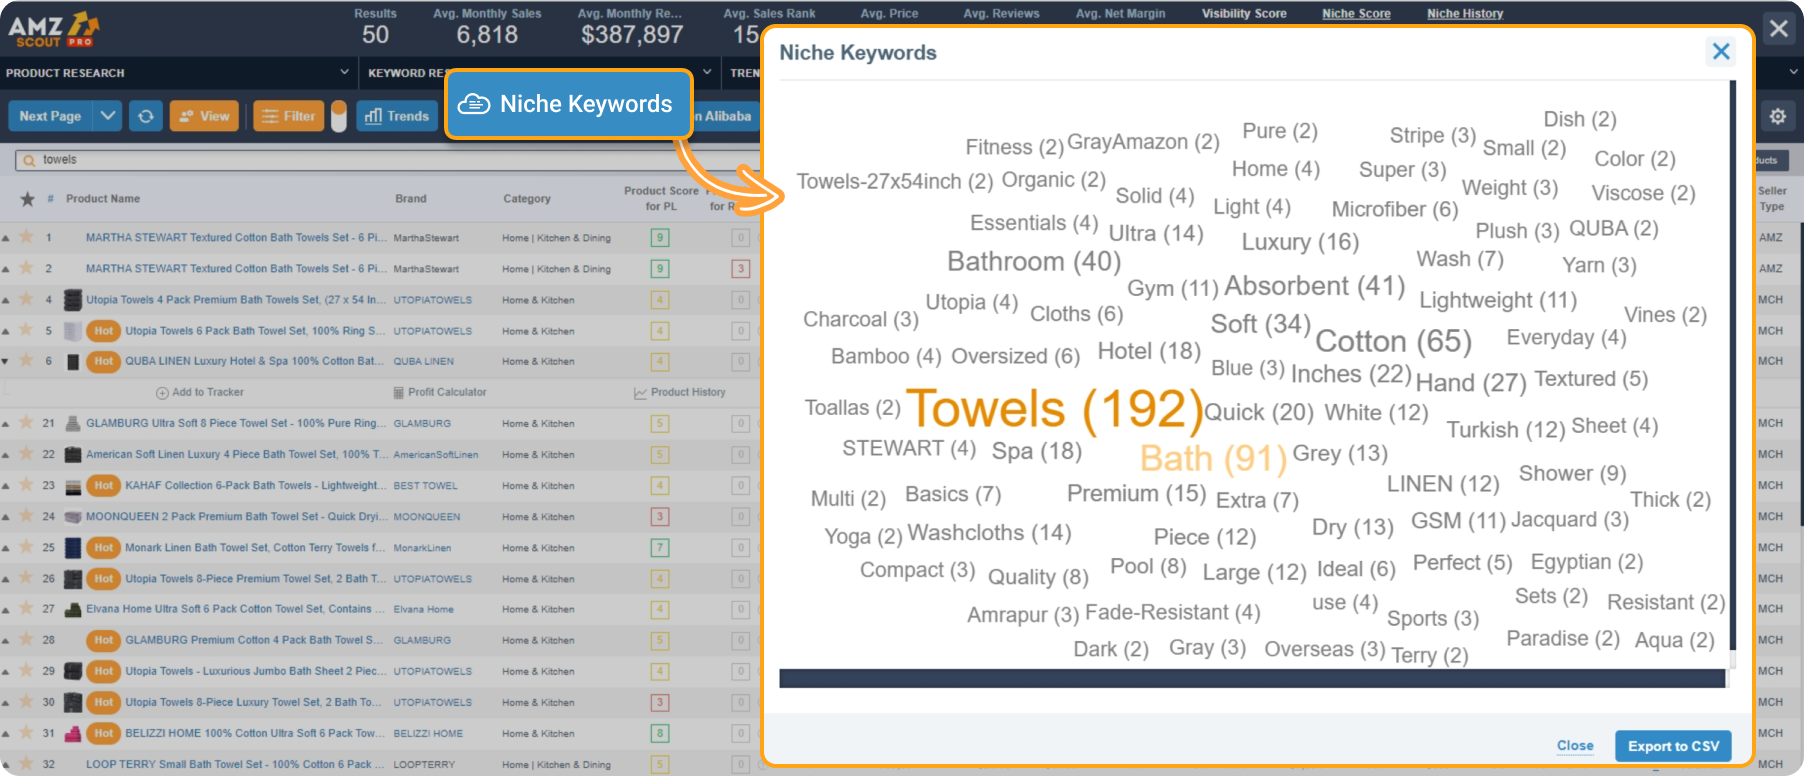 Where to find AMZScout Niche Keywords